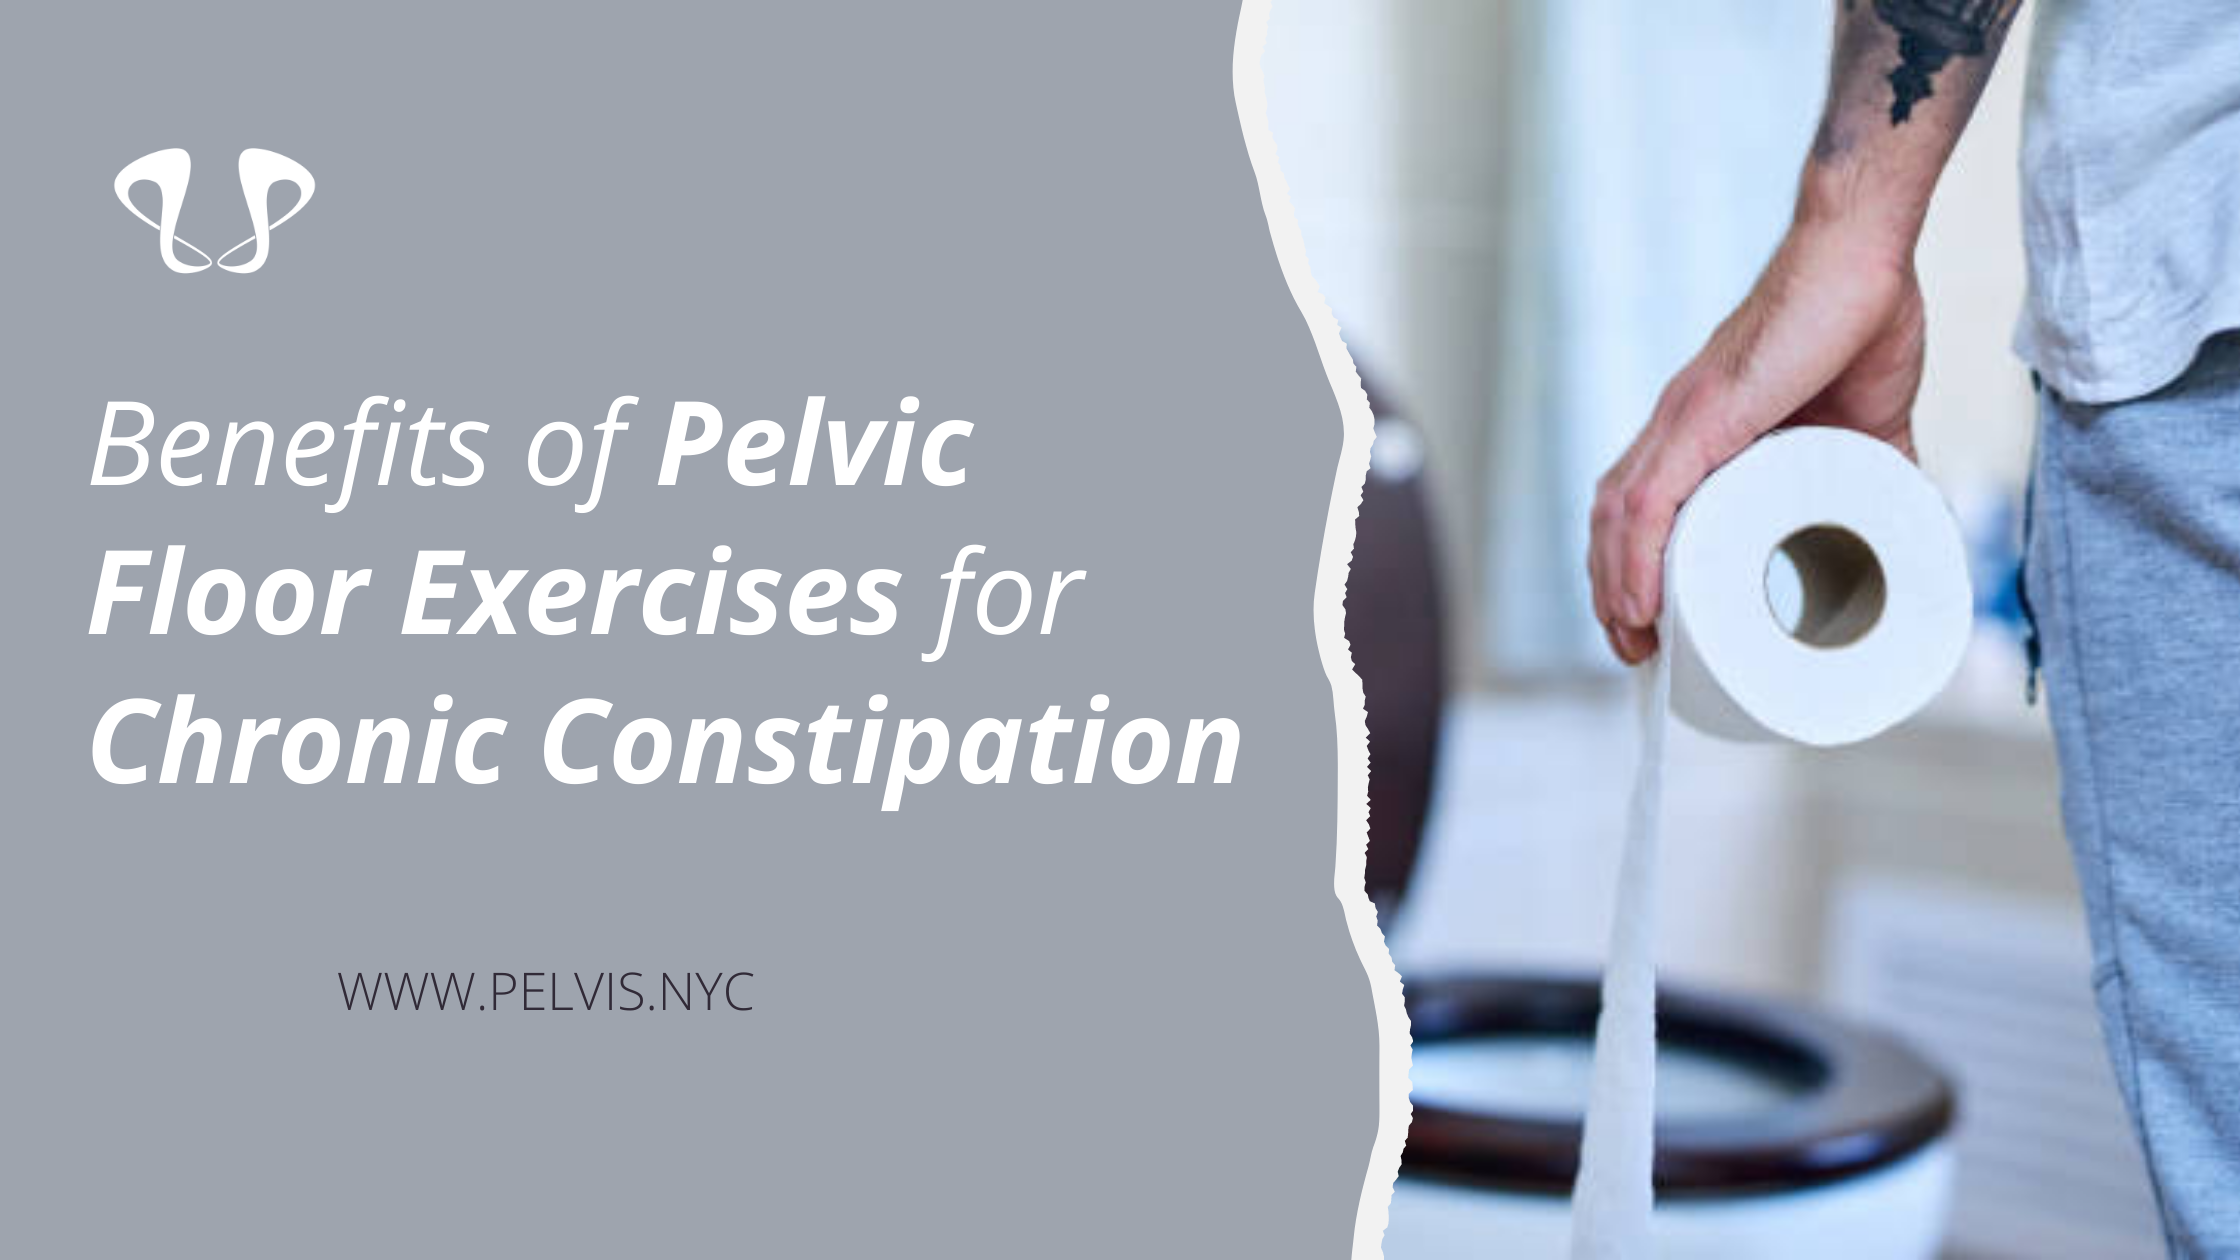 Benefits of Pelvic Floor Exercises for Chronic Constipation